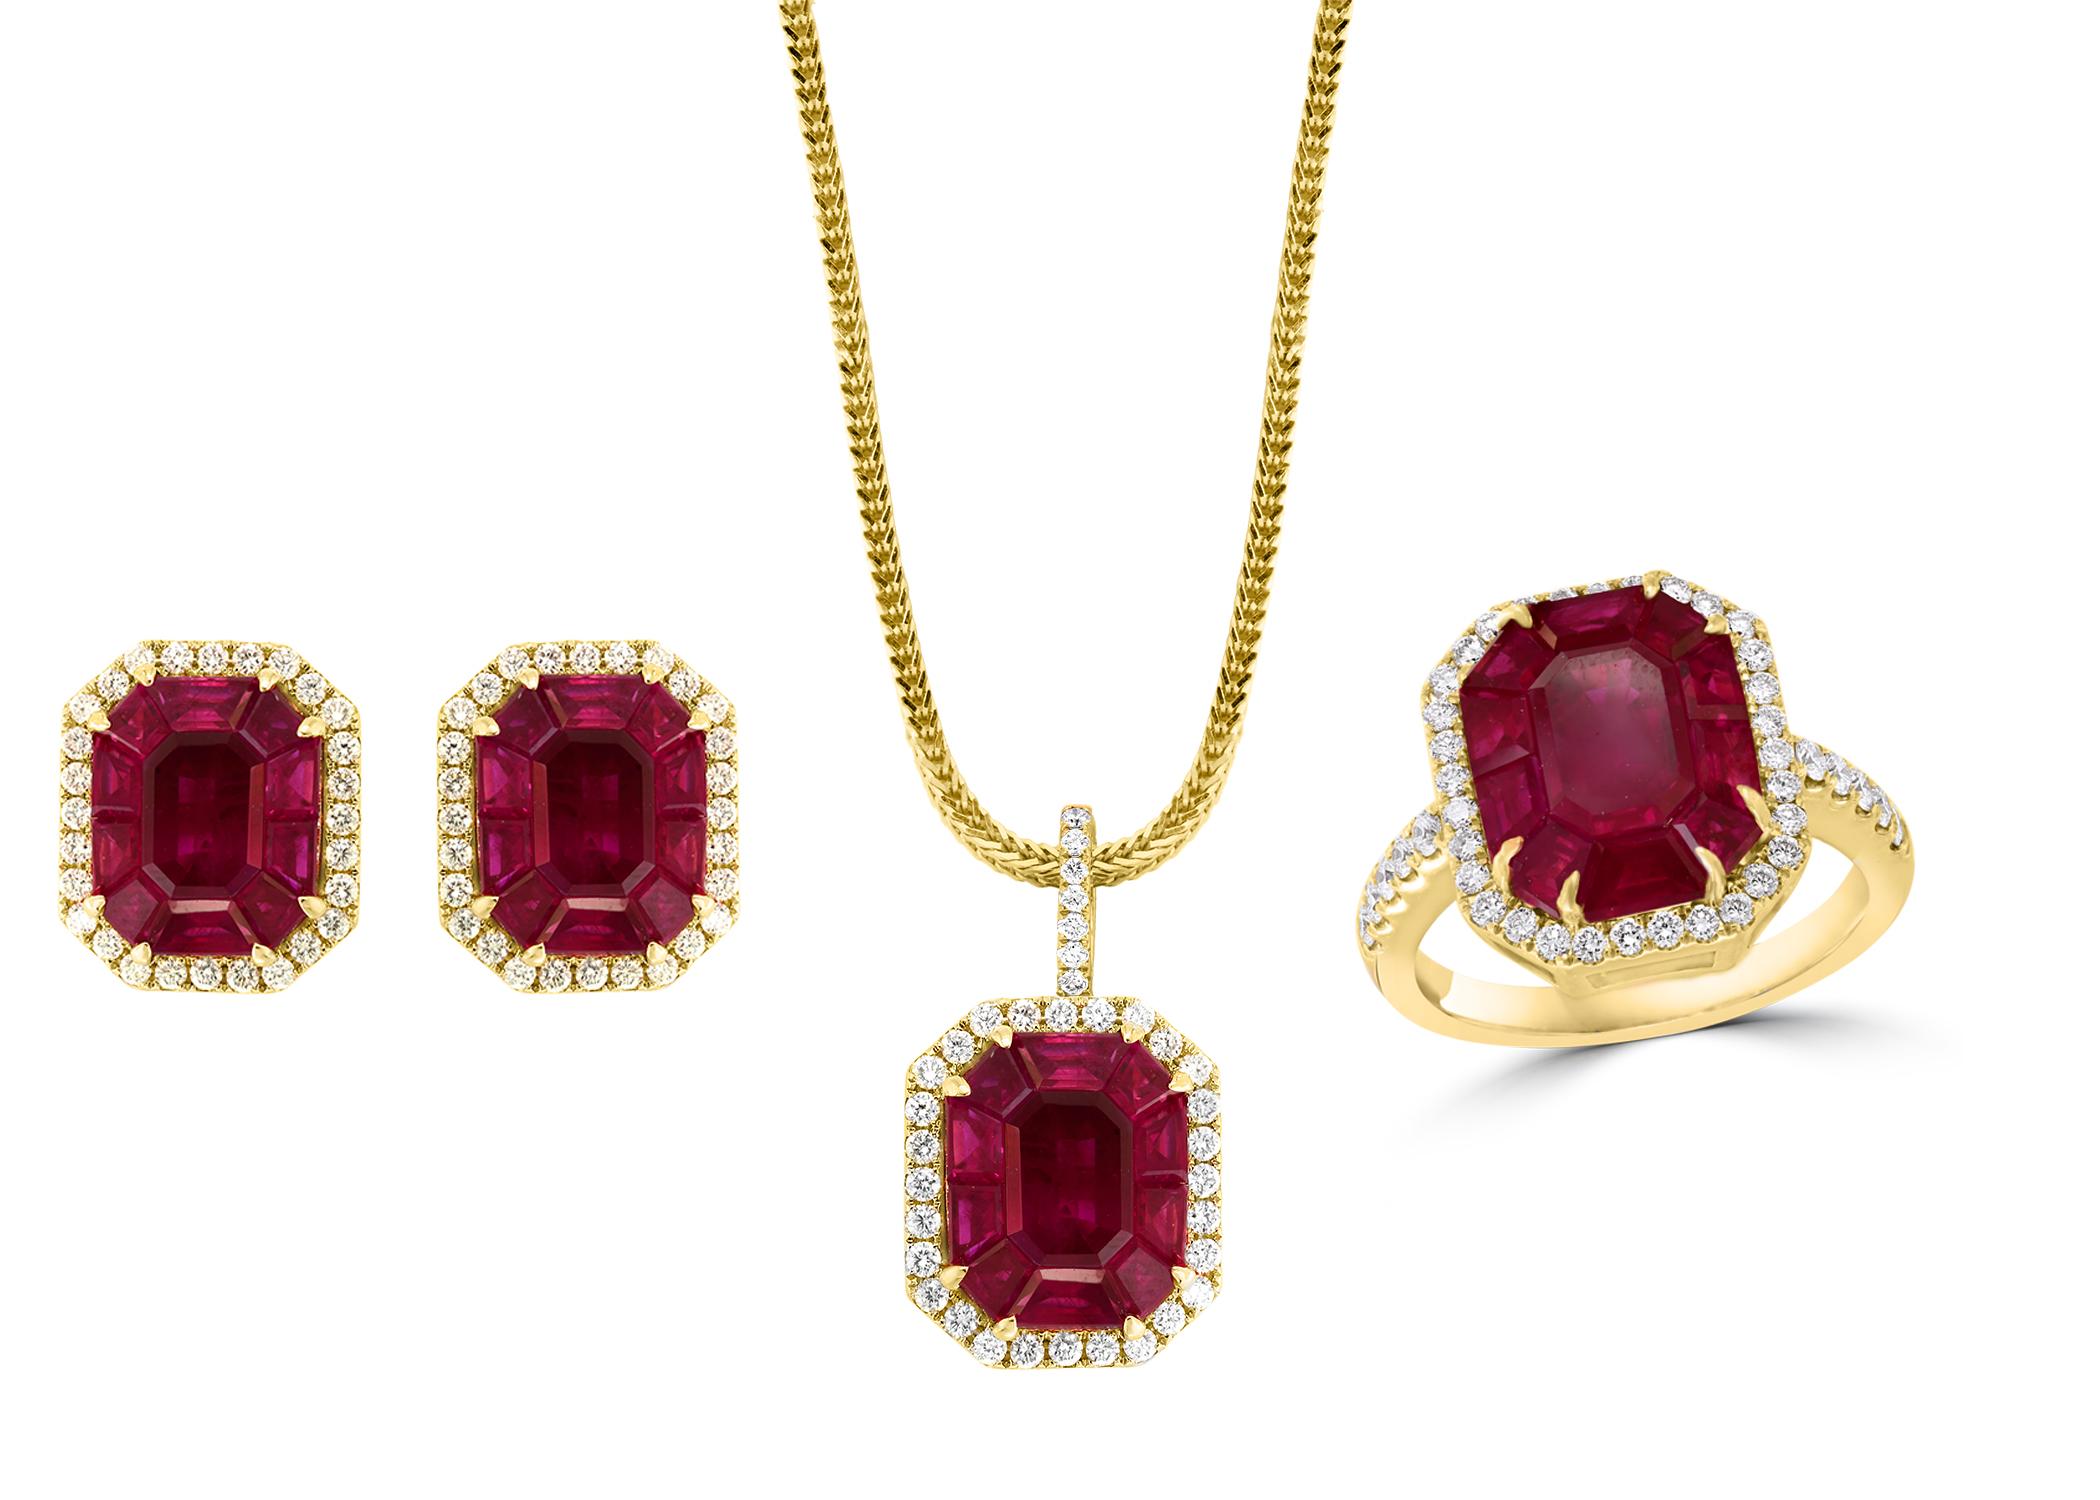 12 Carat Natural Burma Ruby and Diamond Earring in 18 Karat  Yellow Gold
This spectacular  earrings consisting of natural Burma ruby. One Emerald shape ruby 12 X10 , It look like a whole one single piece but in fact there is a center single stone